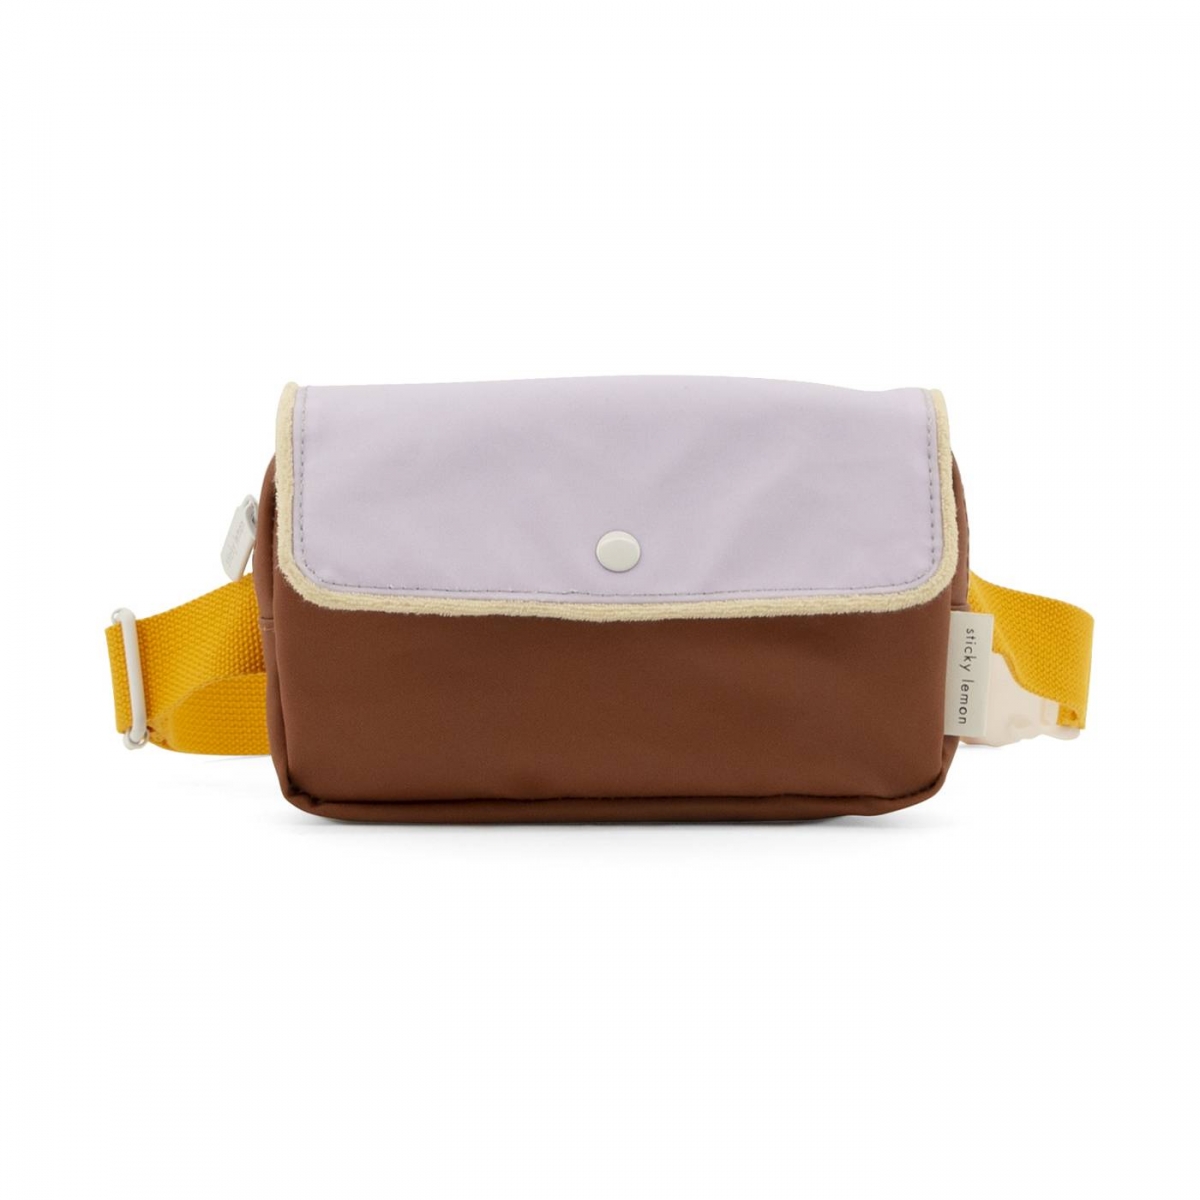 Sticky Lemon Fanny pack Gingham chocolate brown 1801894